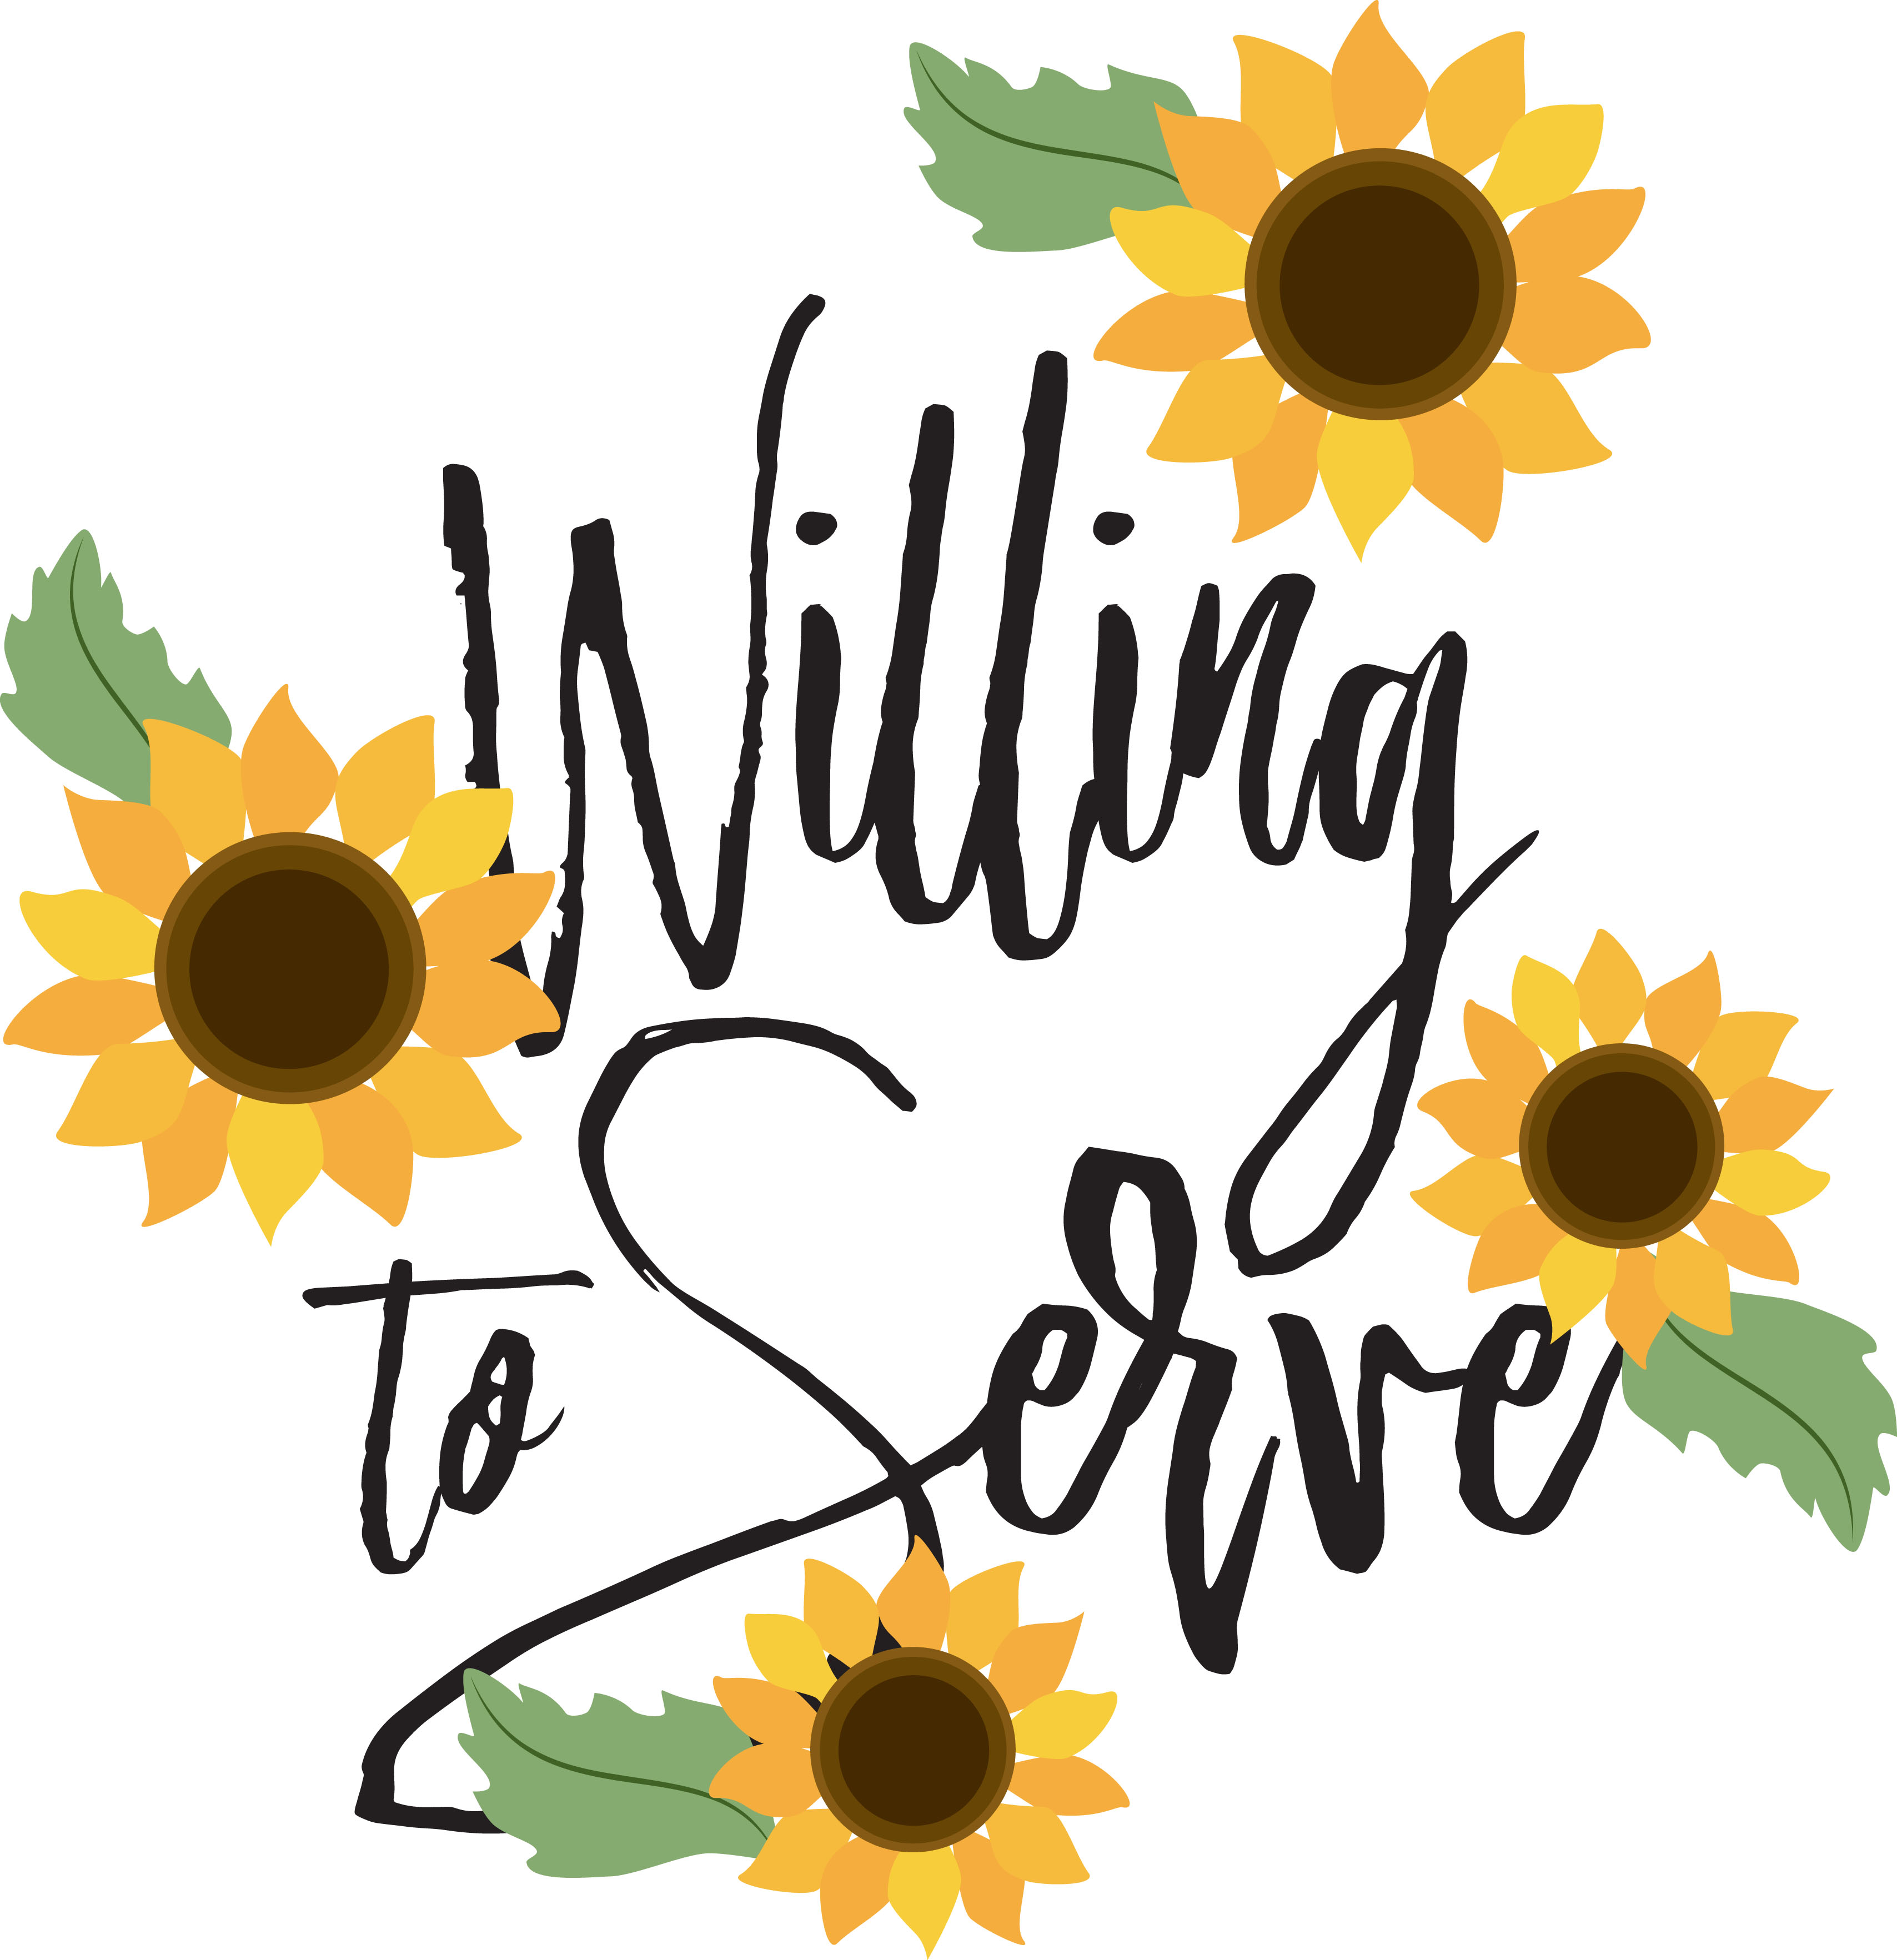 Willing to Serve